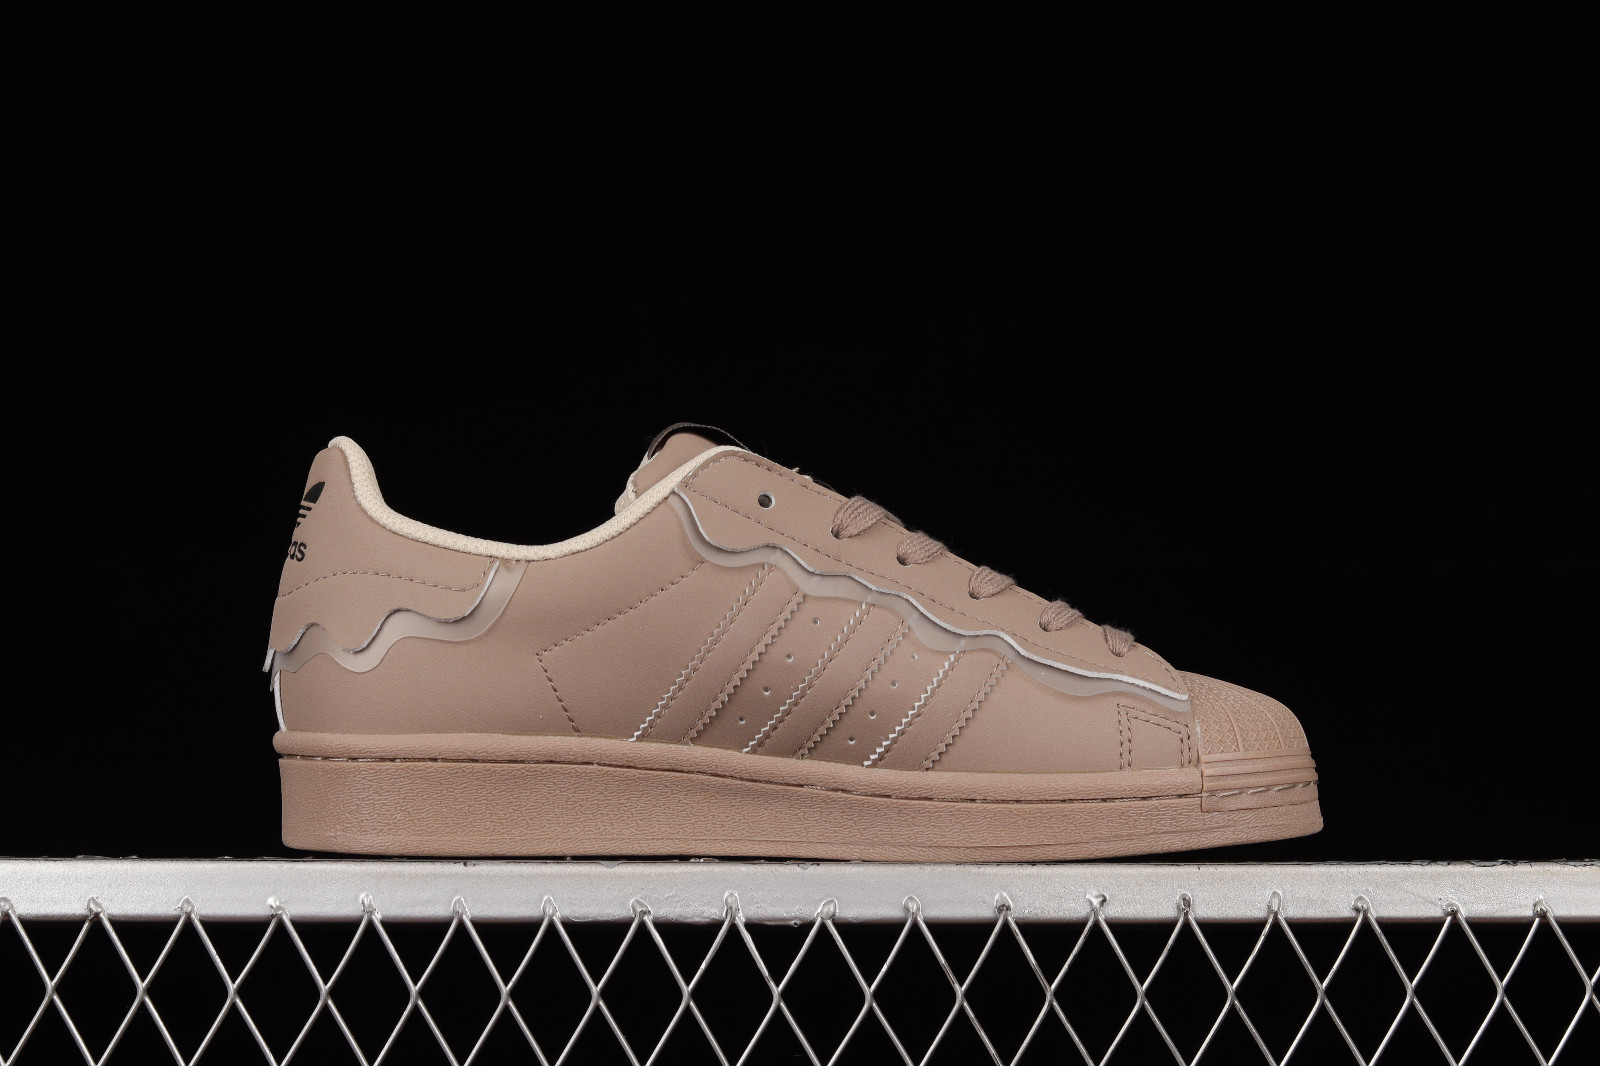 Modernisering mannetje Geavanceerd PhyrtualShops - Adidas Originals Superstar Cappuccino Core Black Metallic  Gold GW4440 - adidas mommy and me youtube channel